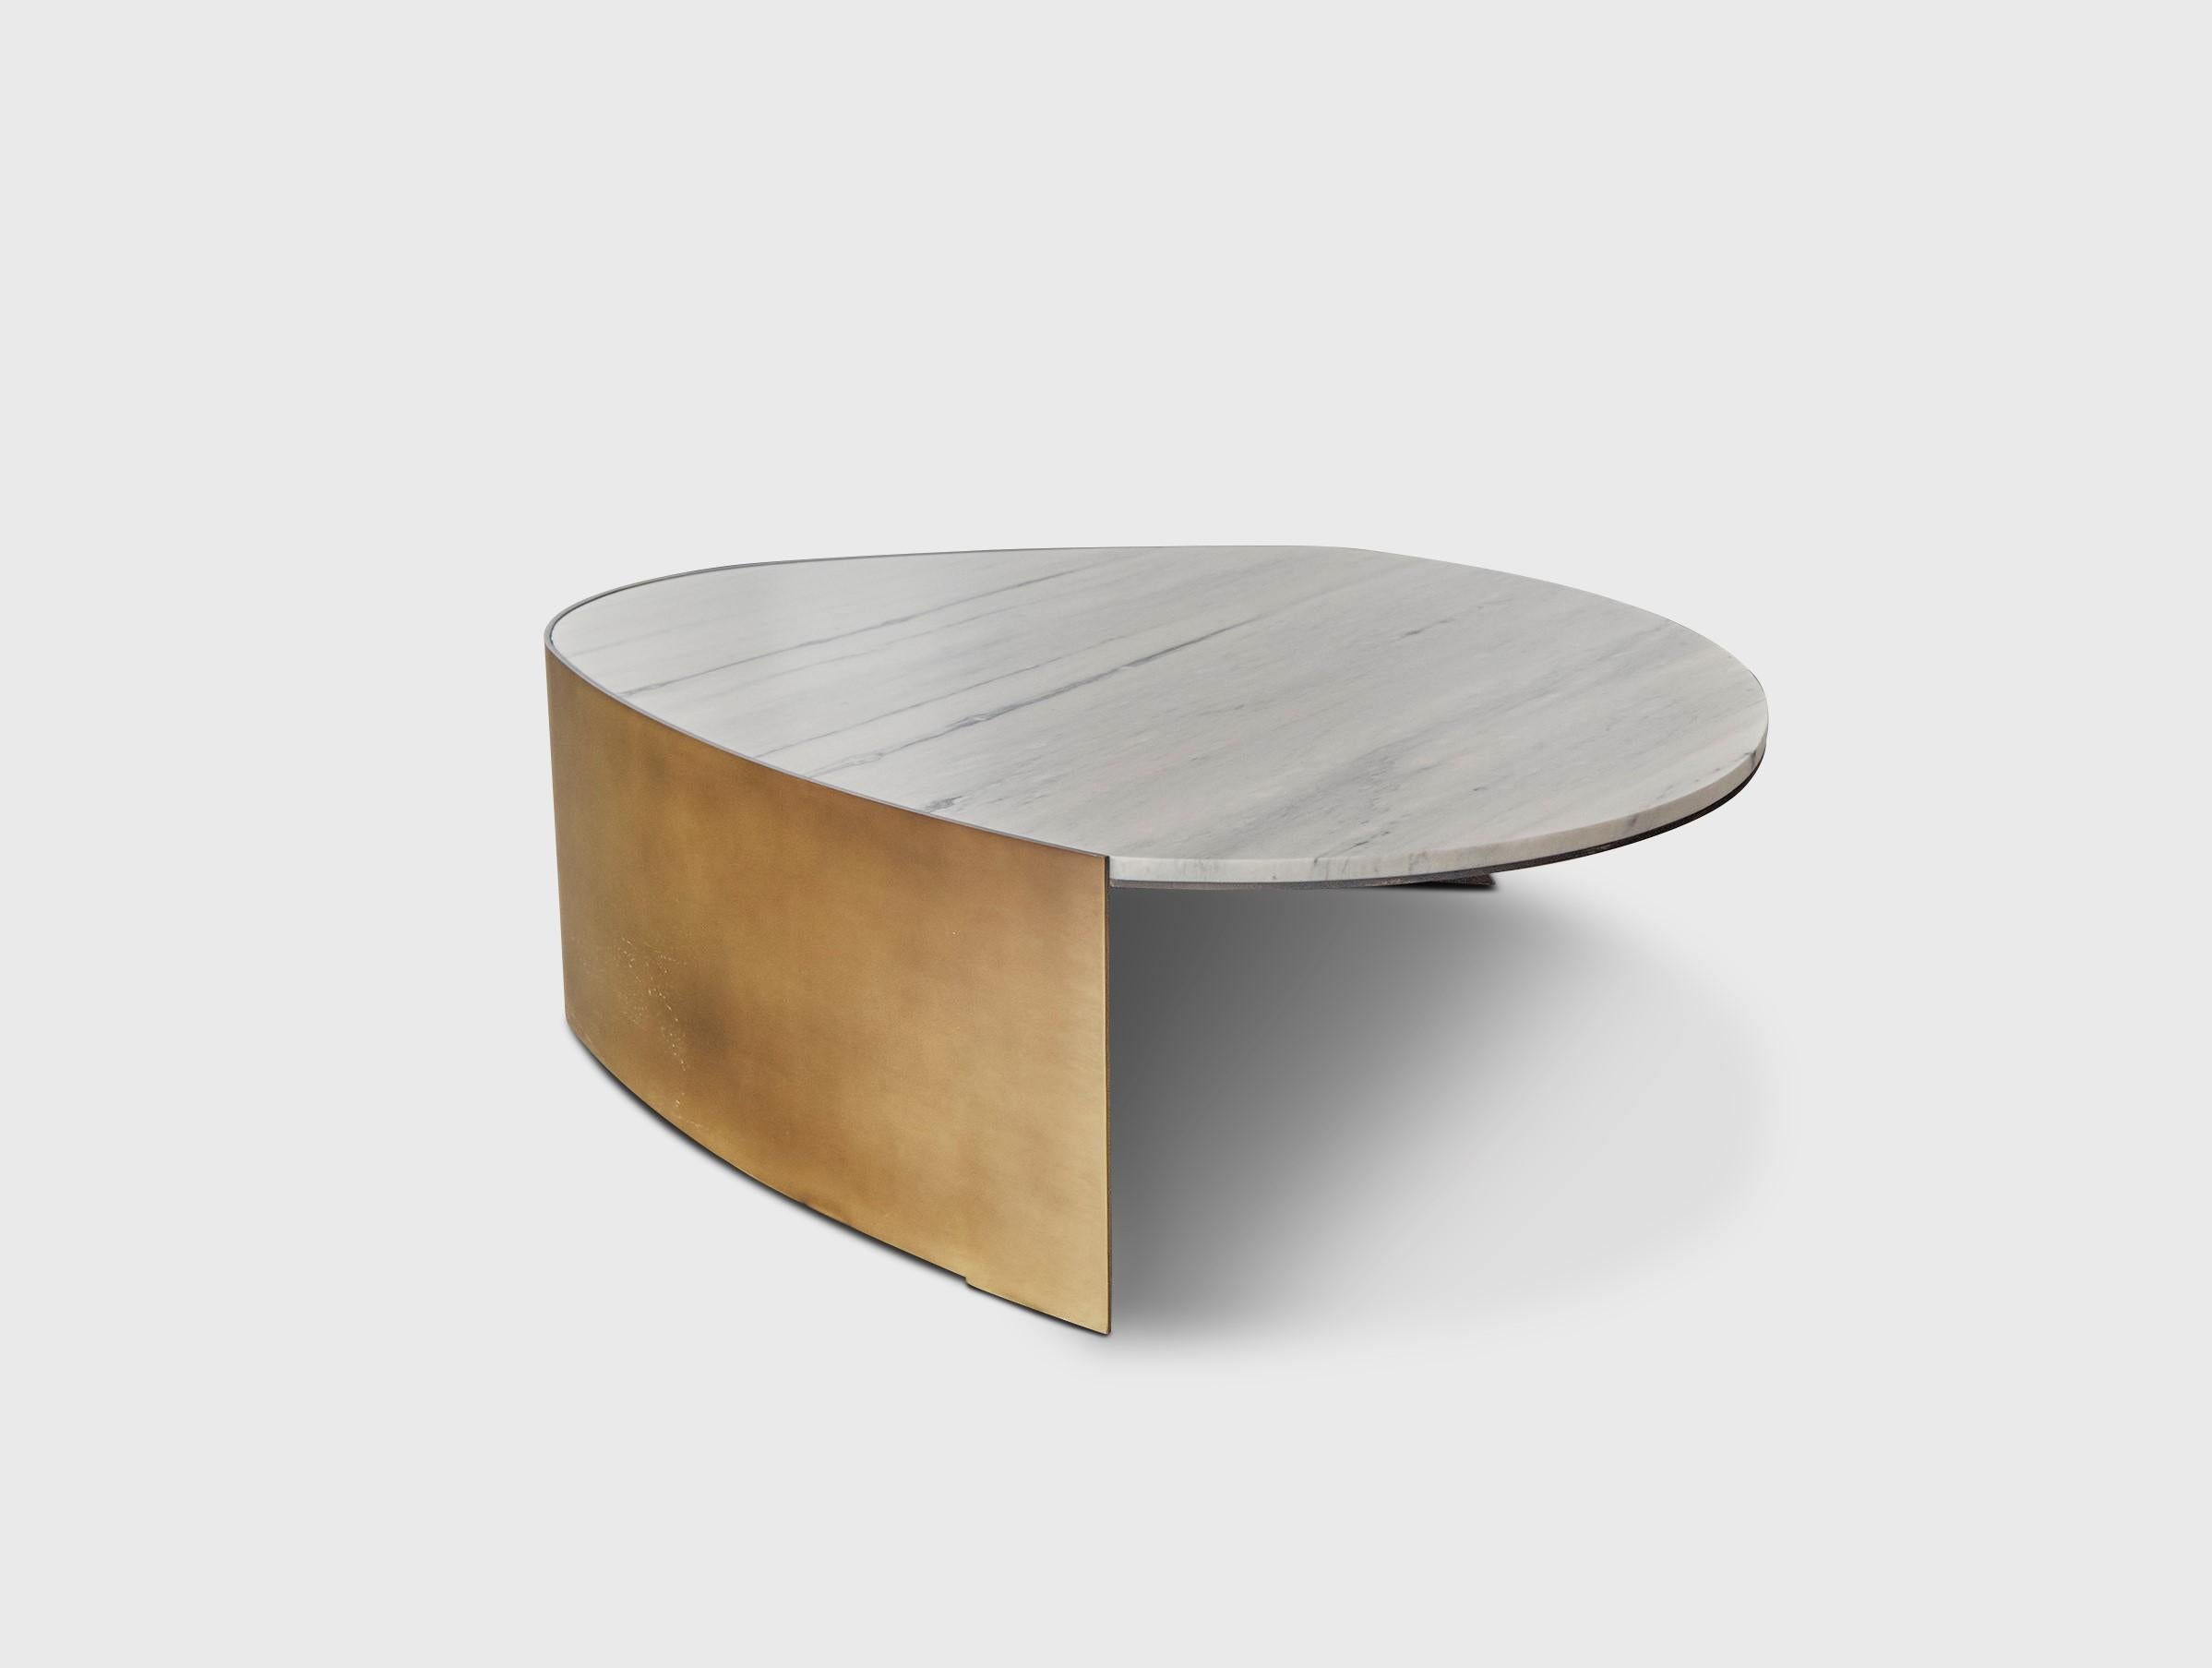 Teardrop coffee table by Atra Design
Dimensions: D 35 x W 120 x H 120 cm
Materials: marble, steel.
Other marbles available. Golden painted steel or black painted steel available.

Atra Design
We are Atra, a furniture brand produced by Atra form a